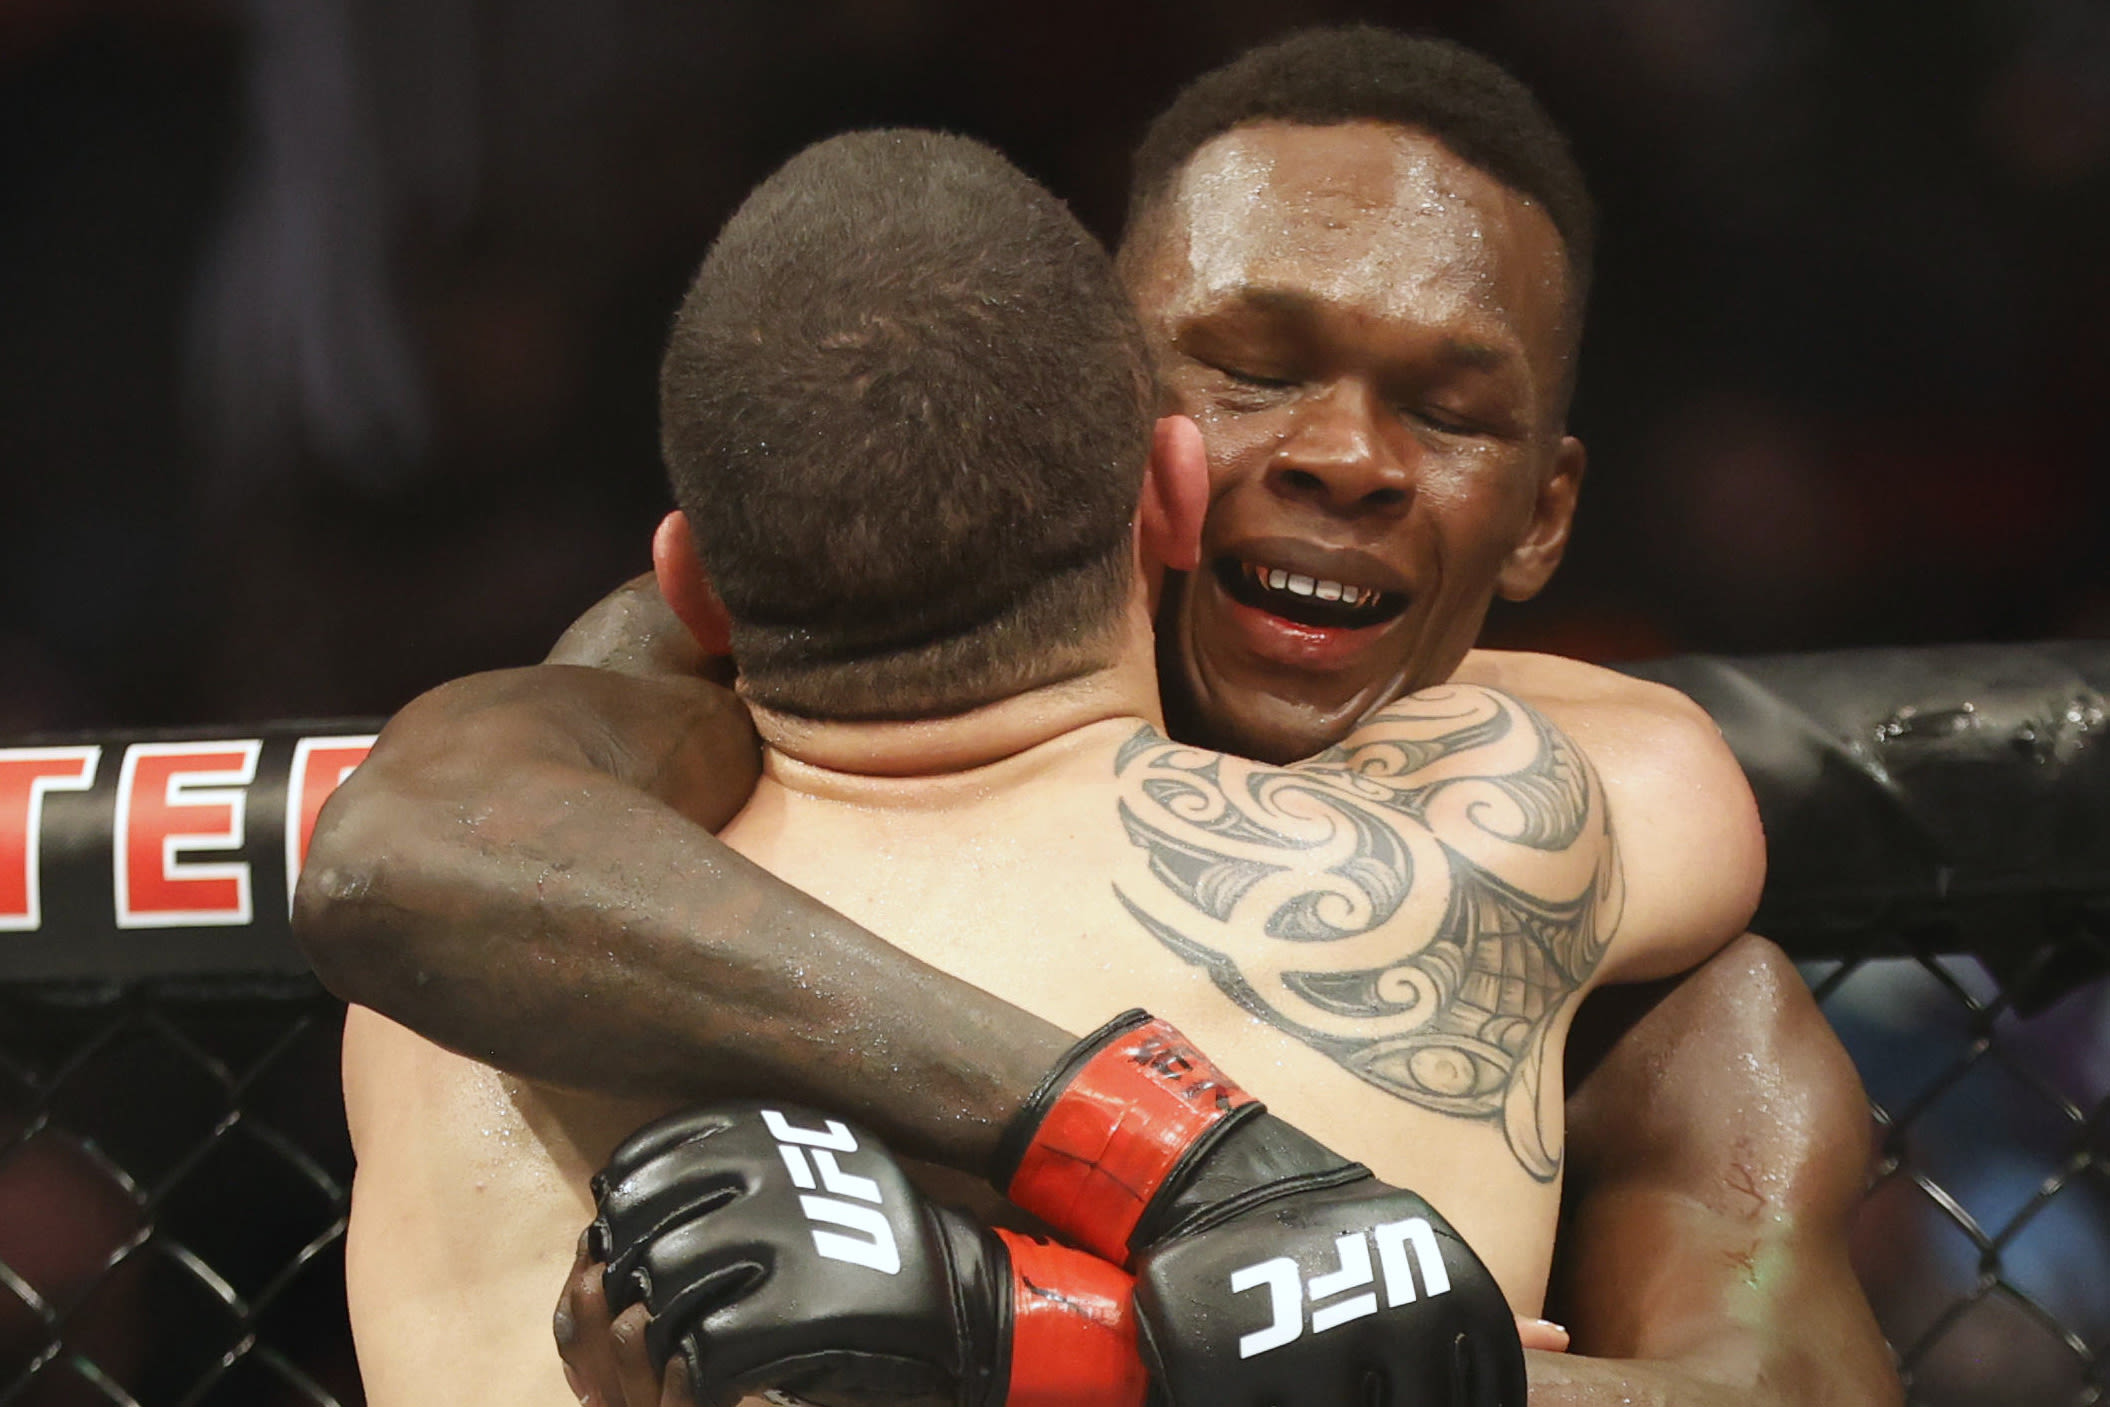 Israel Adesanya happy to see former rival Robert Whittaker back in UFC win column